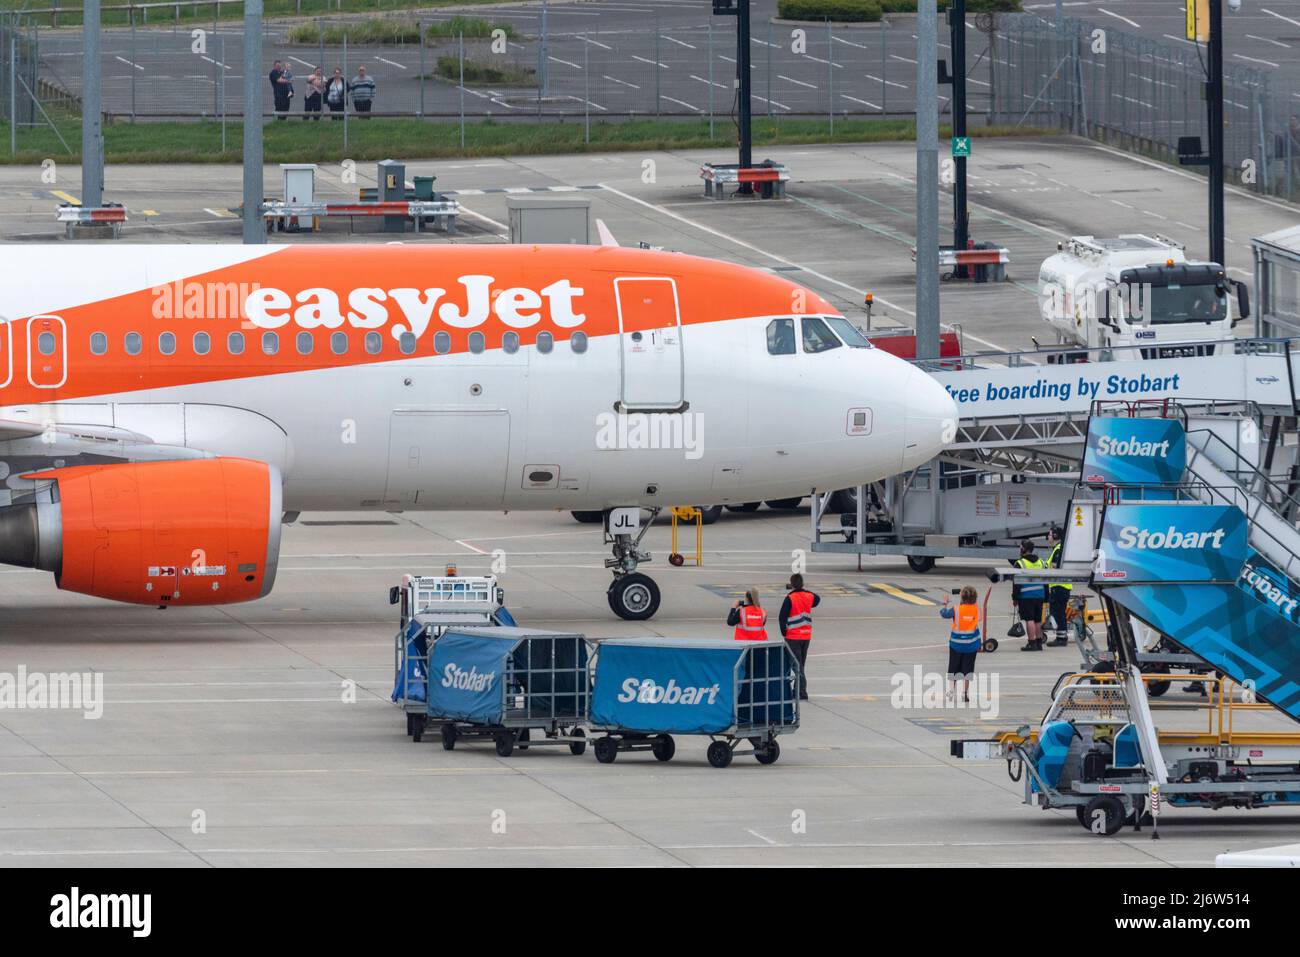 First arrival at London Southend Airport, Essex, UK, following six months of no flights due to COVID 19. easyJet service from Spain. Stobart equipment Stock Photo